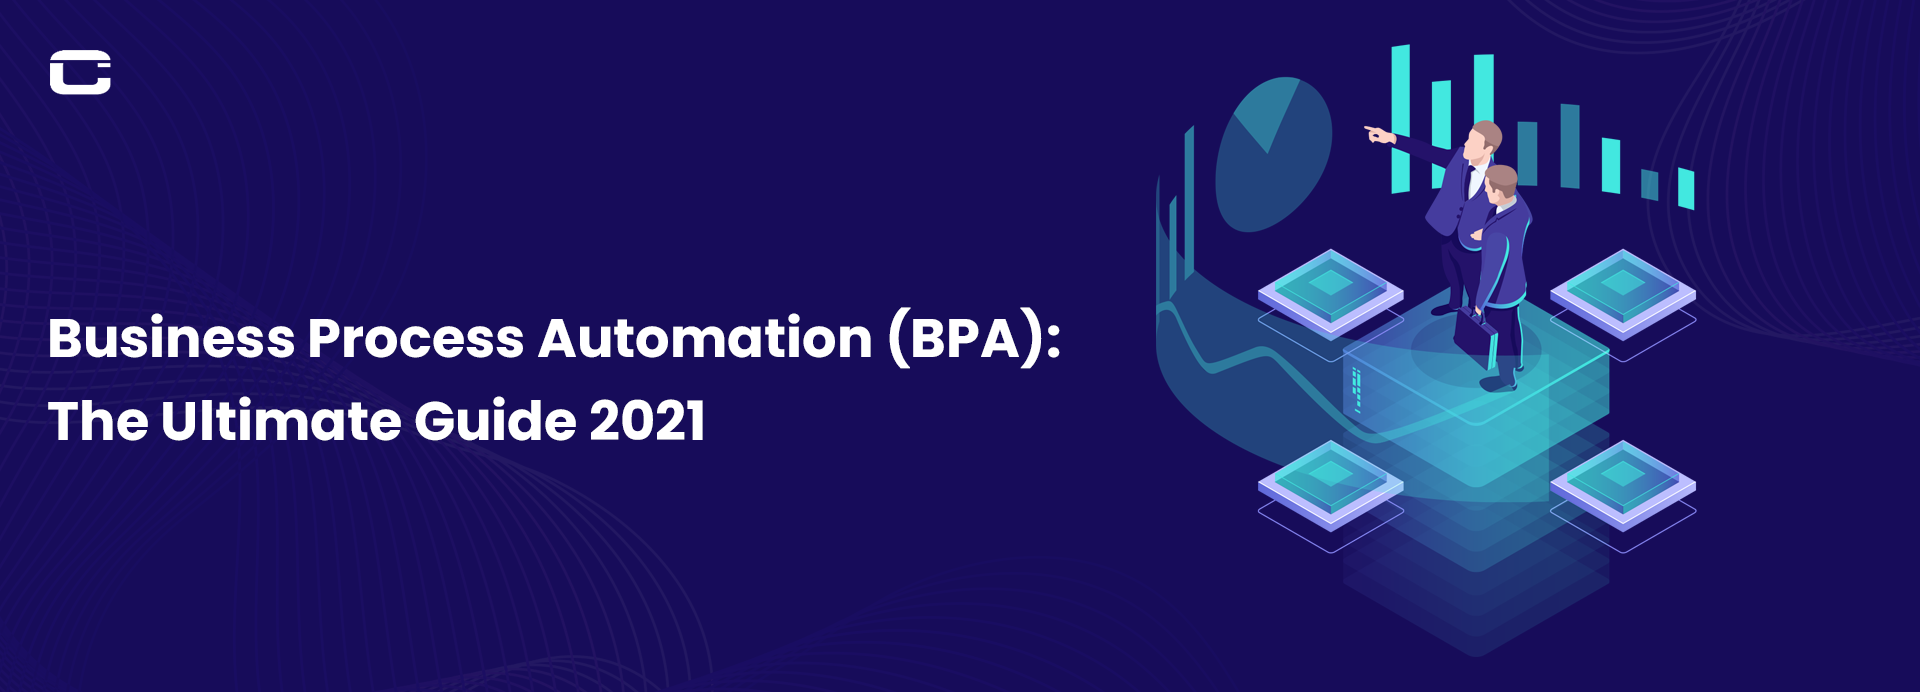 The Complete Guide to Business Process Automation